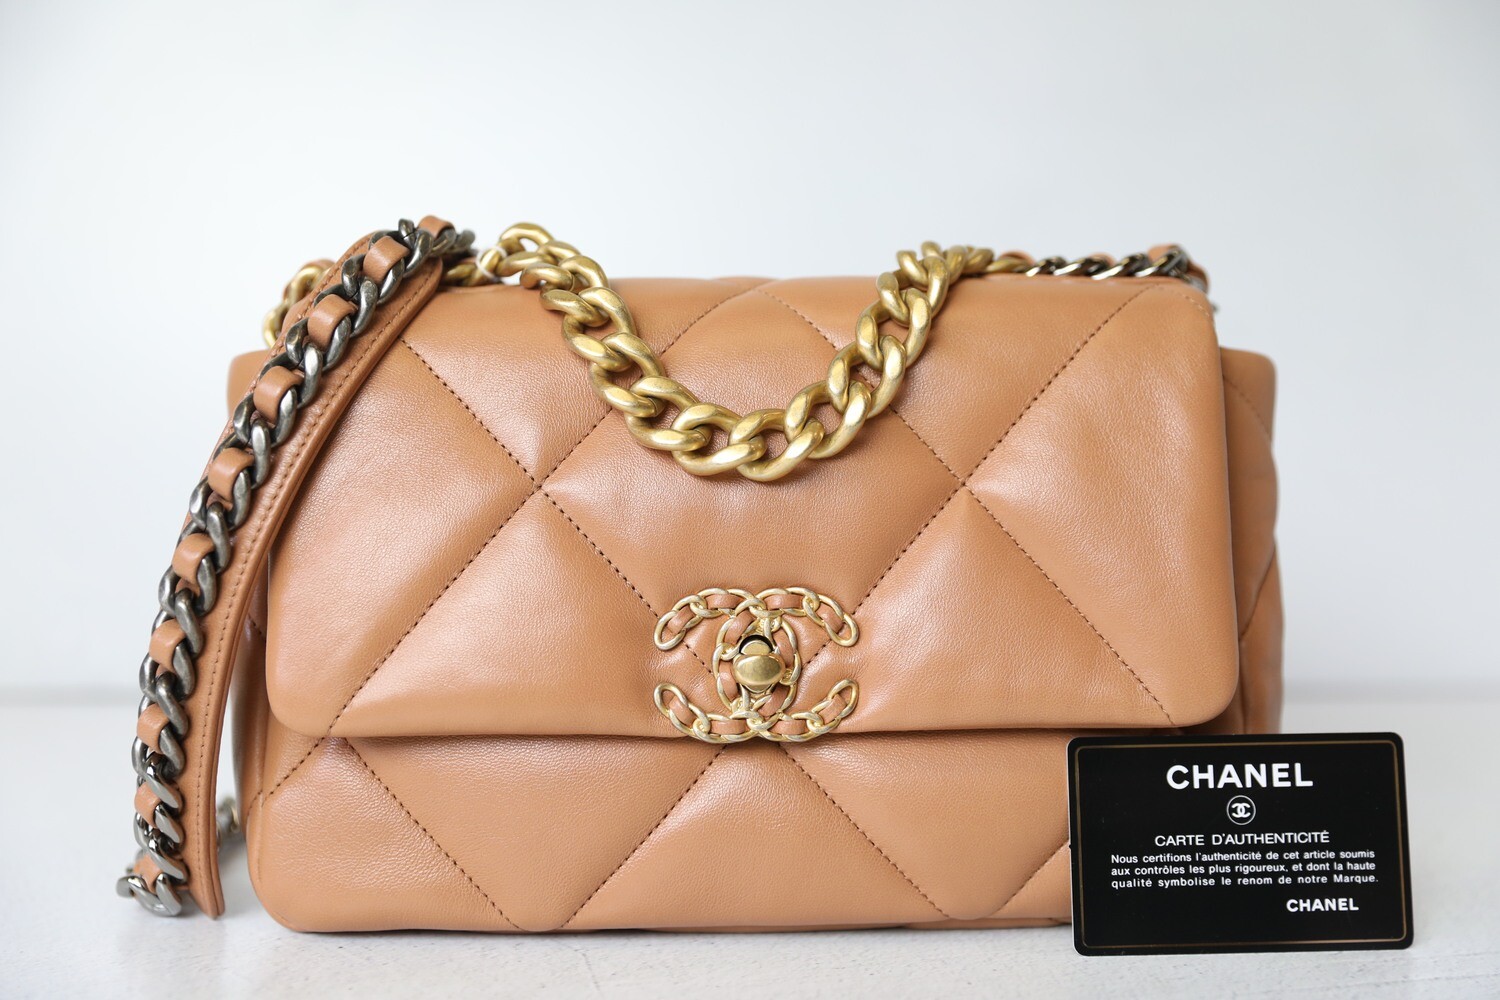 Chanel 19 Small, 21P Caramel Brown Lambskin Leather, New in Box